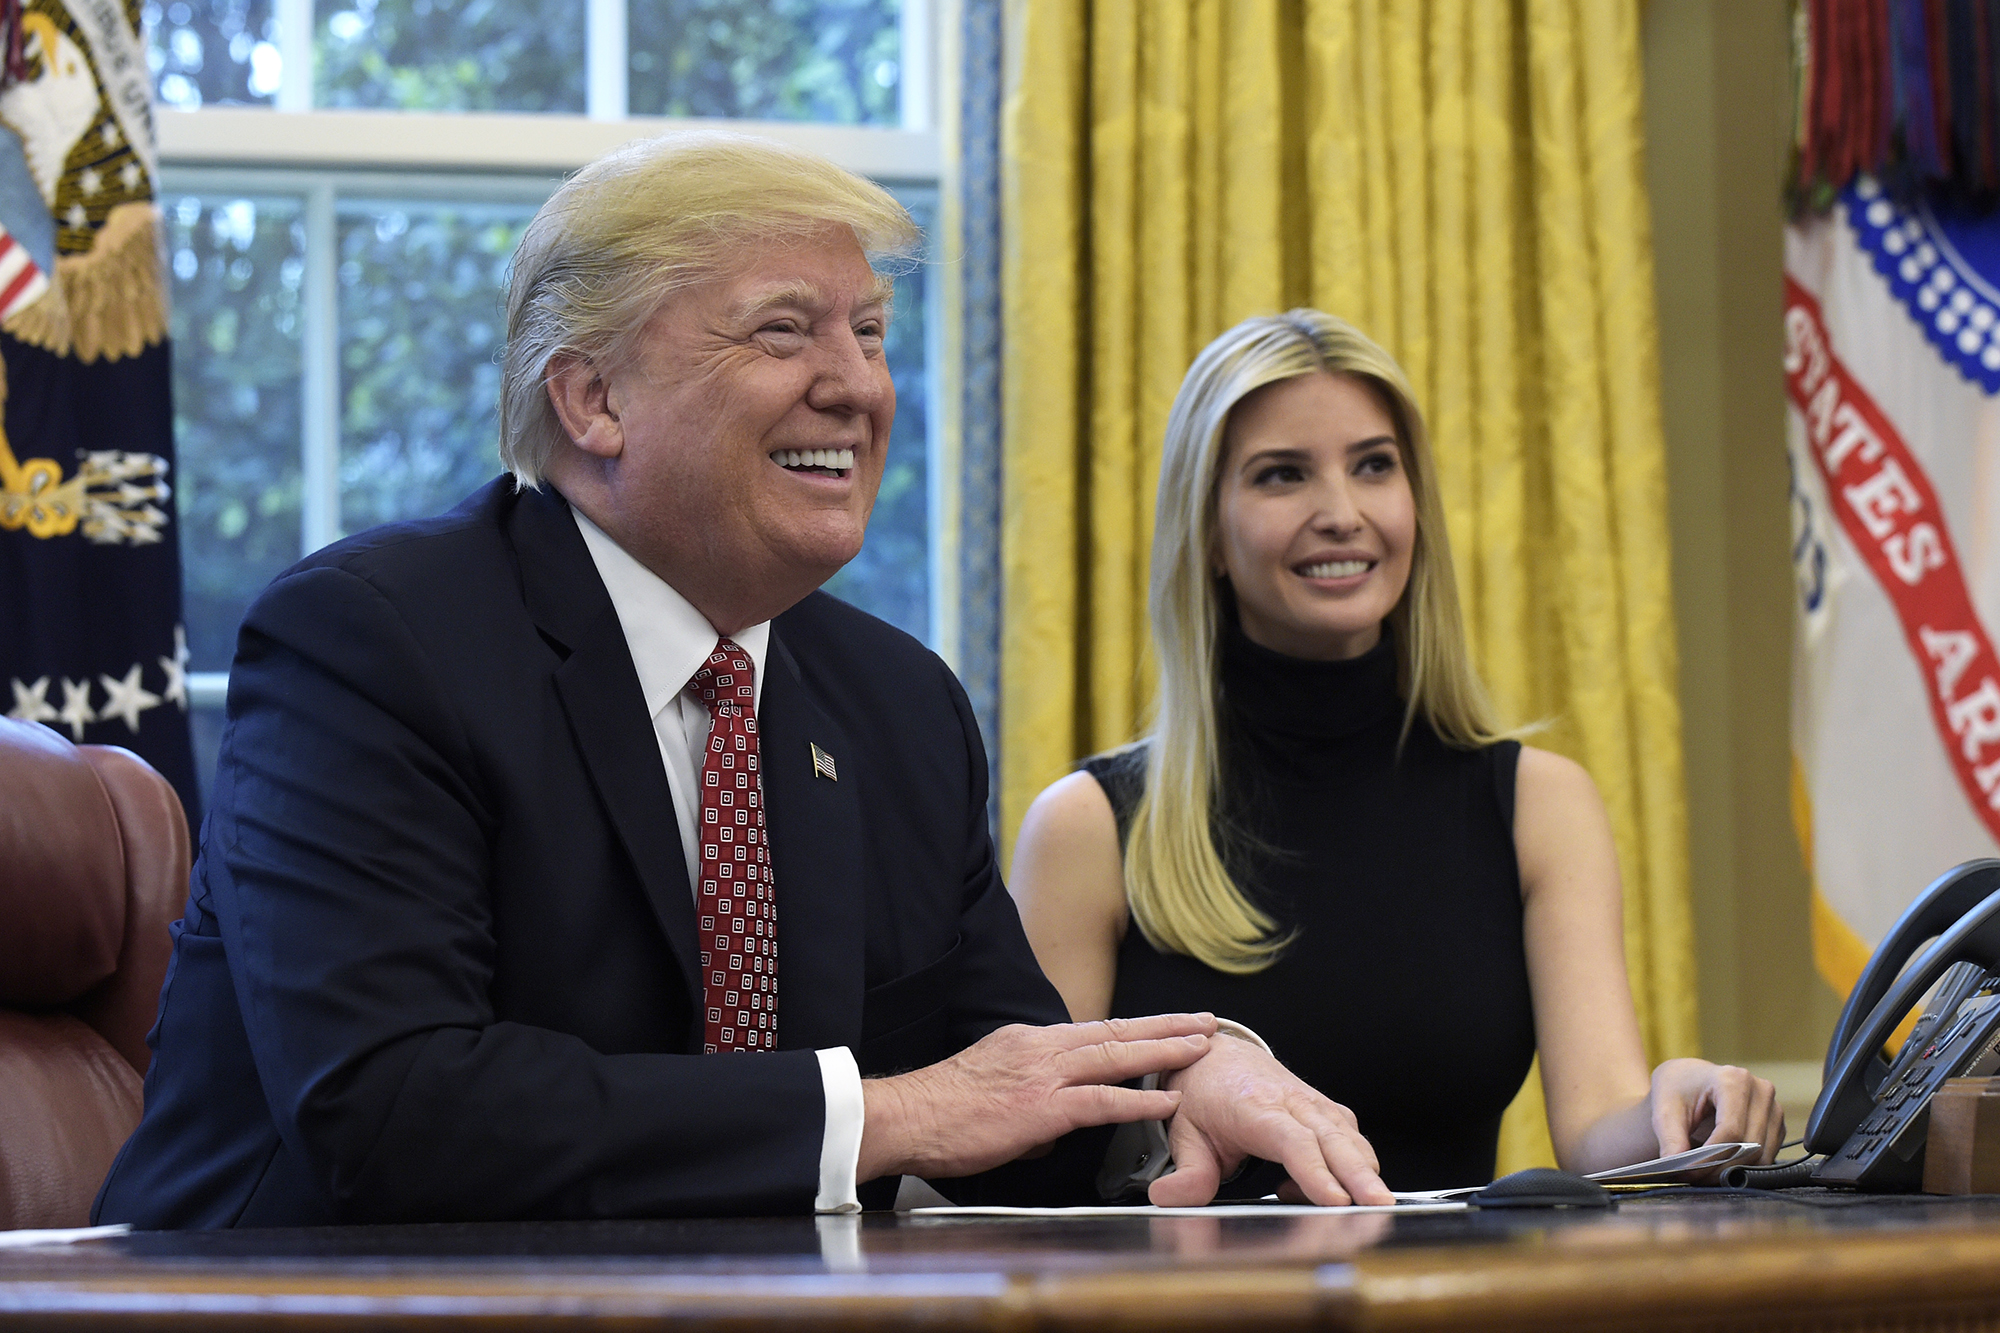 Donald Trump, accompanied by his daughter Ivanka Trump, talk via video conference with International Space Station Commander Peggy Whitson in Washington, D.C., on April 24, 2017. (Susan Walsh—AP)